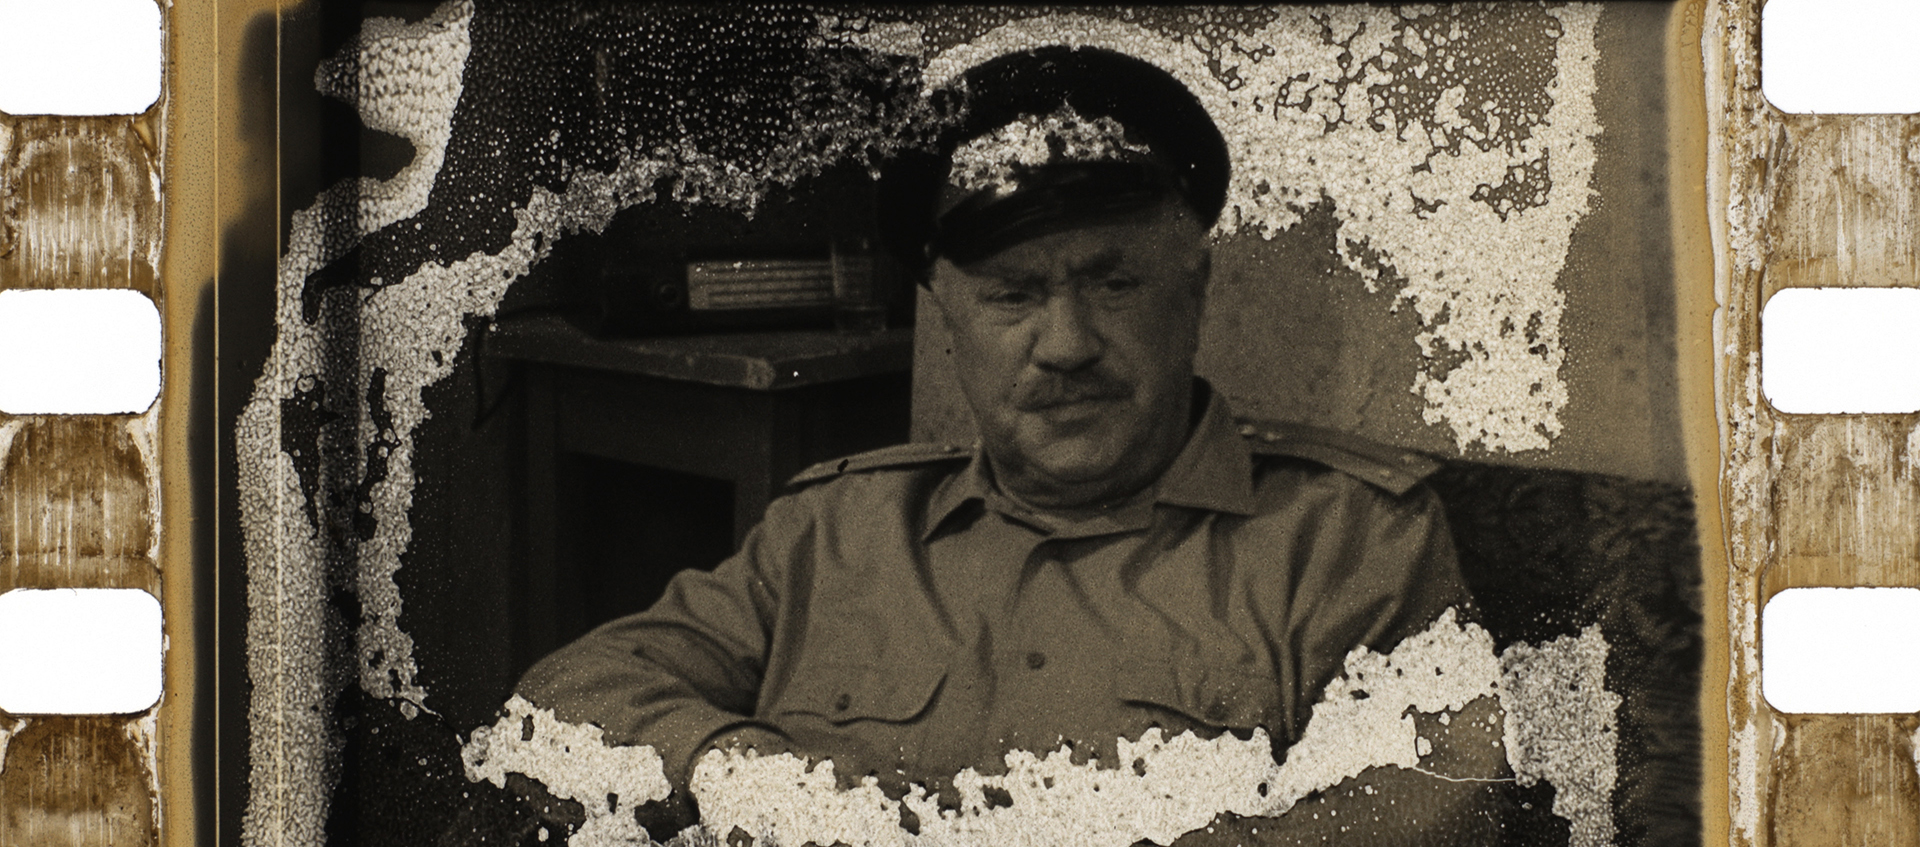 A deteriorating strip of film with an image of a man in a hat burned onto it